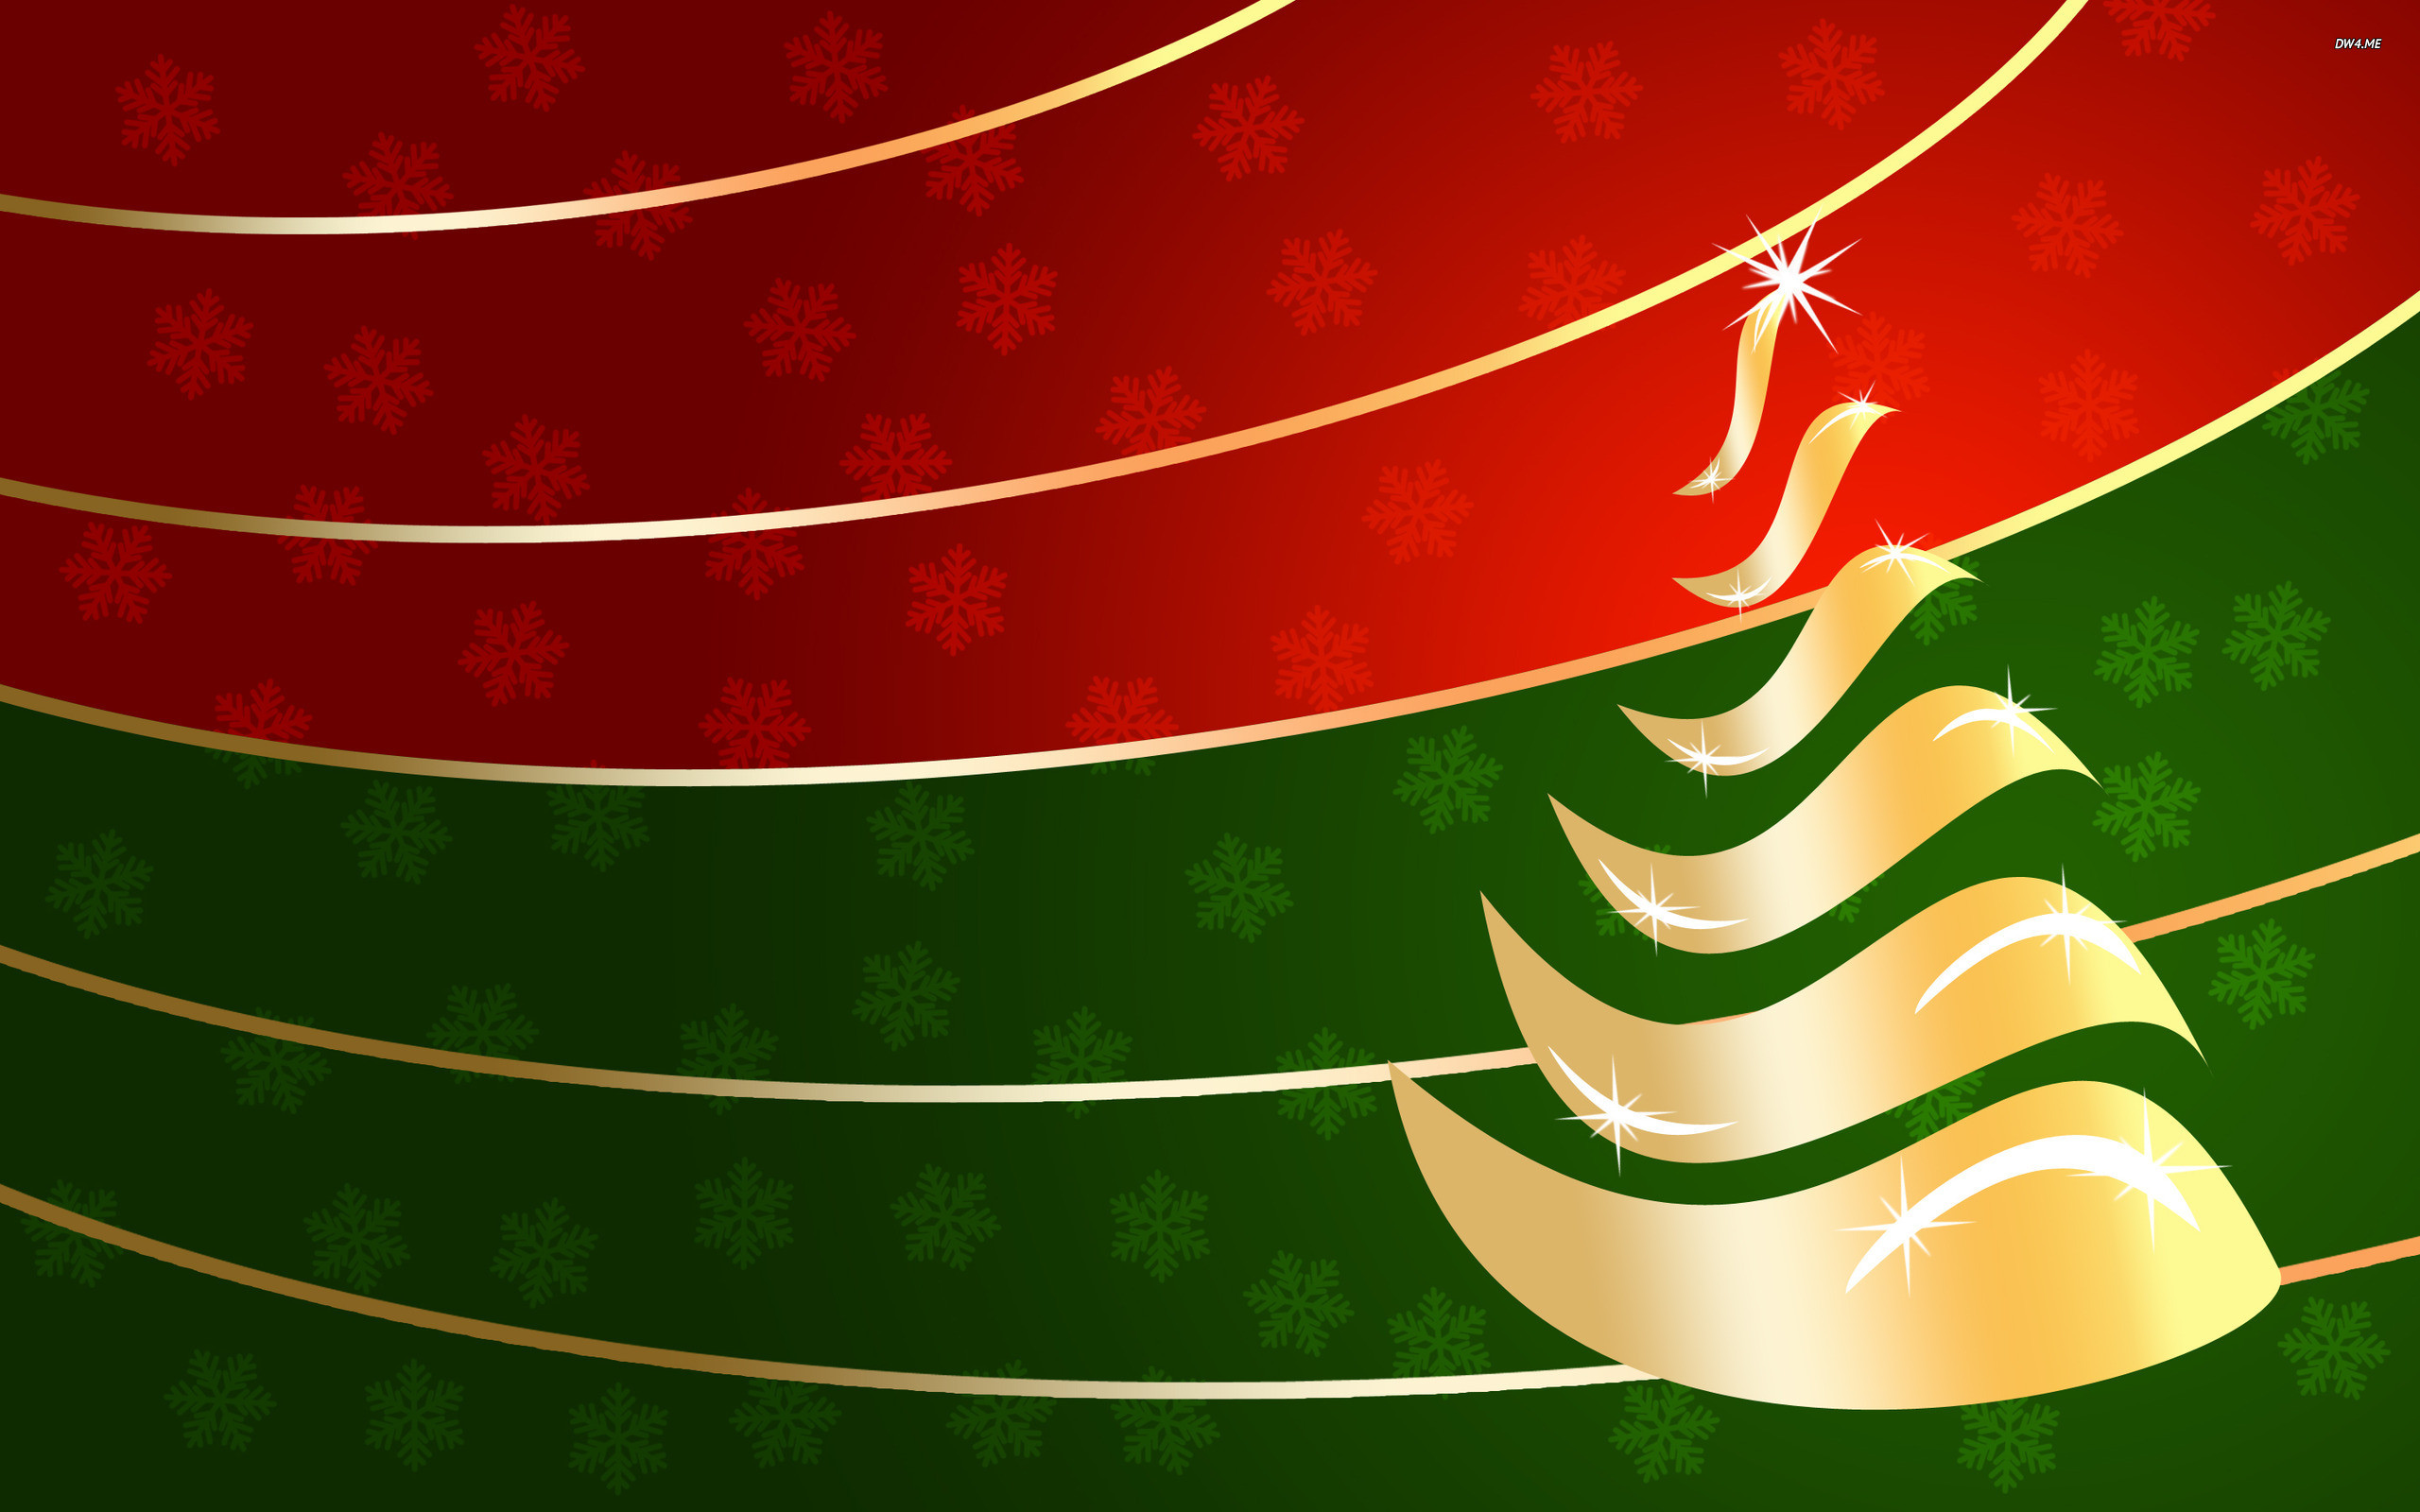 2560x1600 Golden Christmas tree wallpaper - Holiday wallpapers - #987